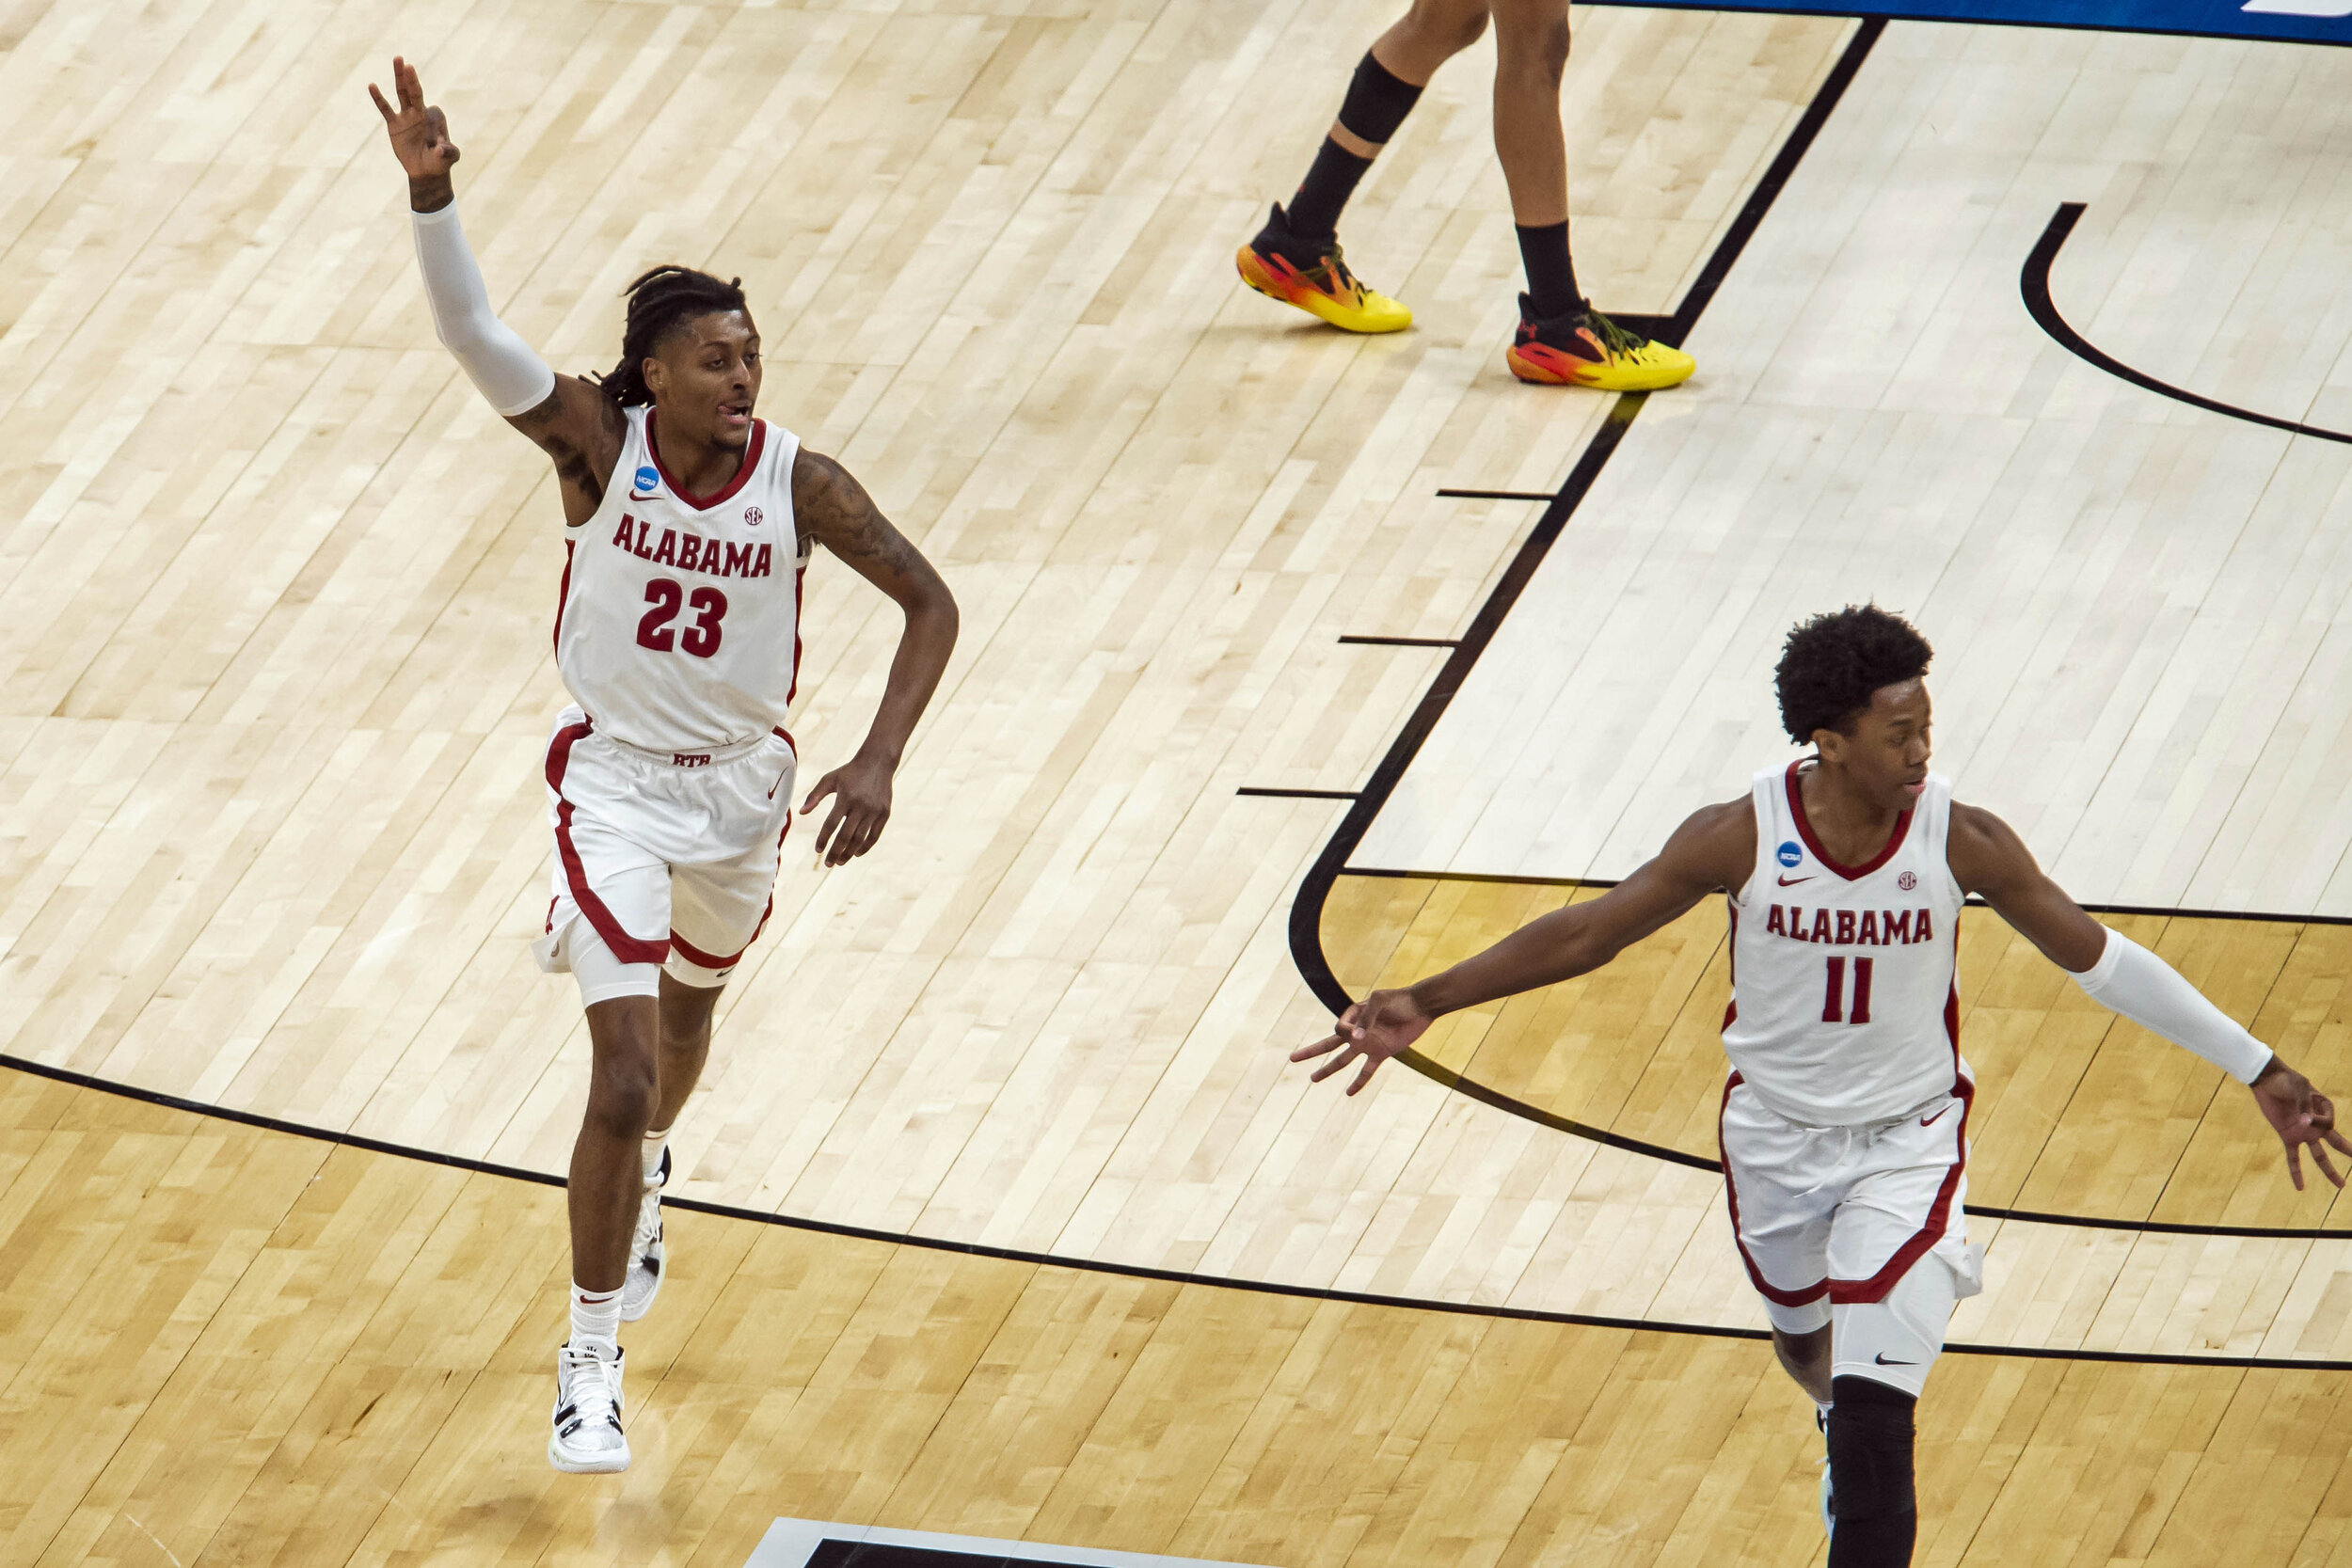 Shackelford, Alabama roll past Maryland and into Sweet 16 - The